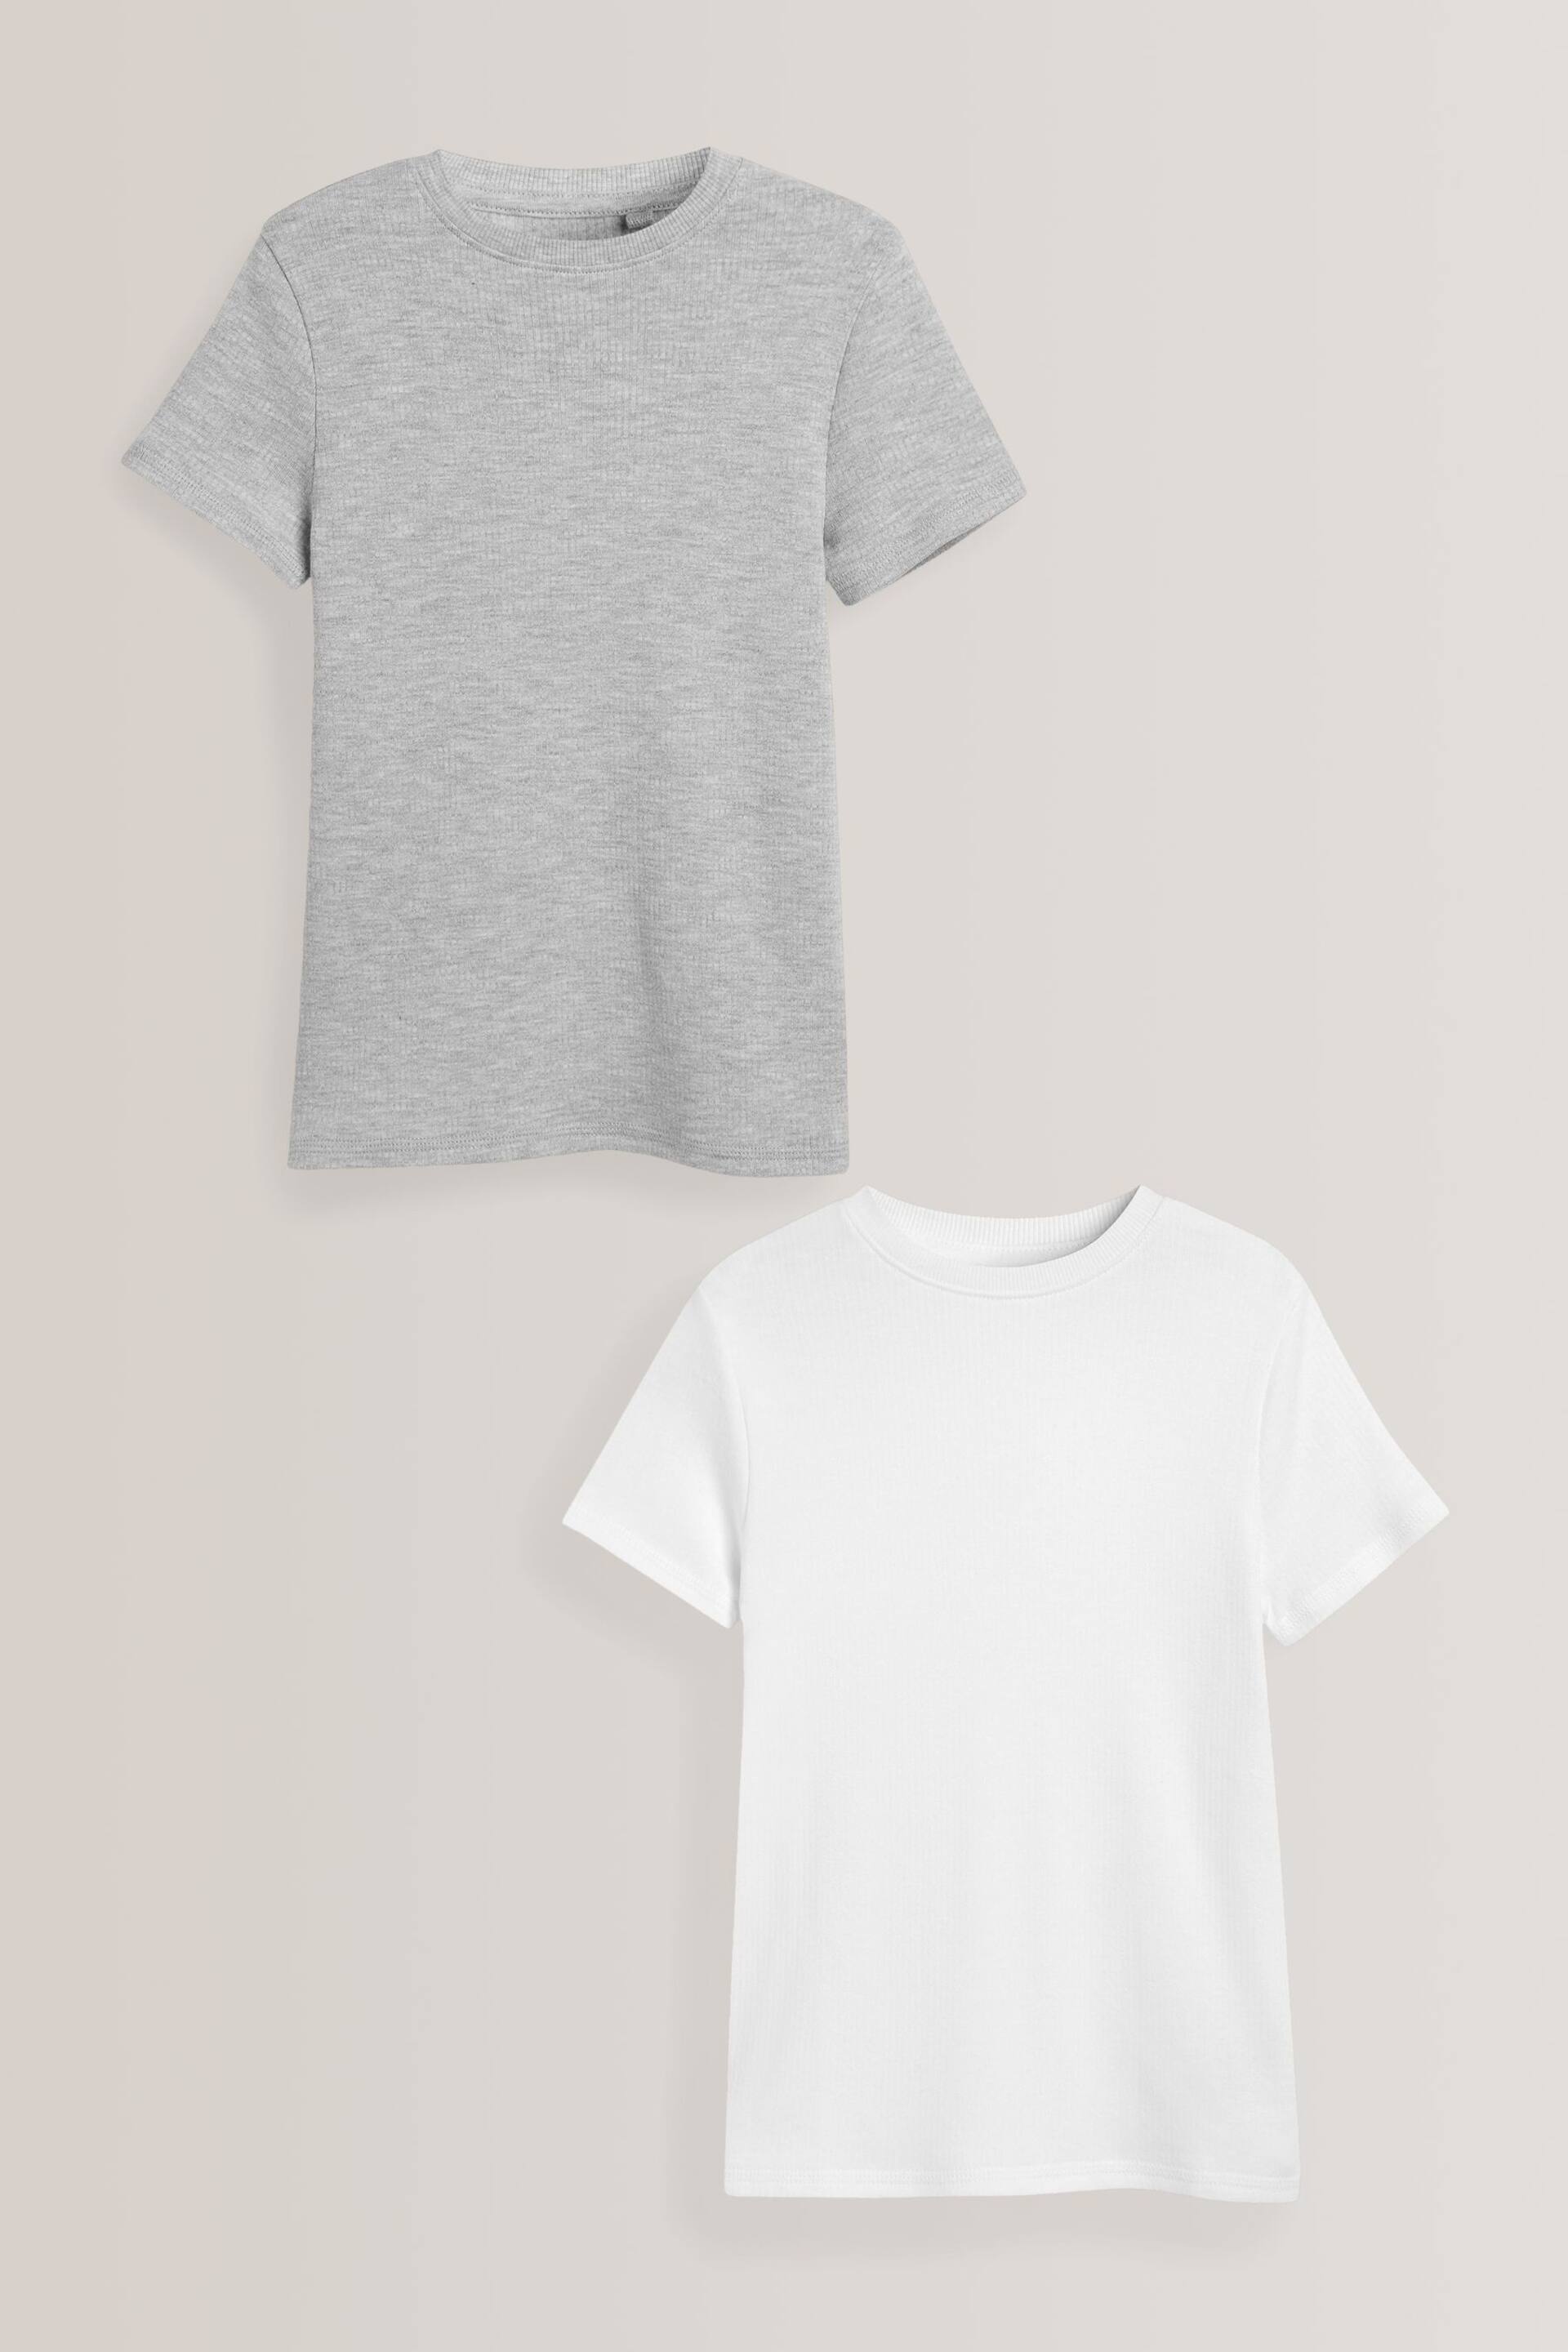 Grey/White 2 Pack Short Sleeved Thermal Tops (2-16yrs) - Image 1 of 5